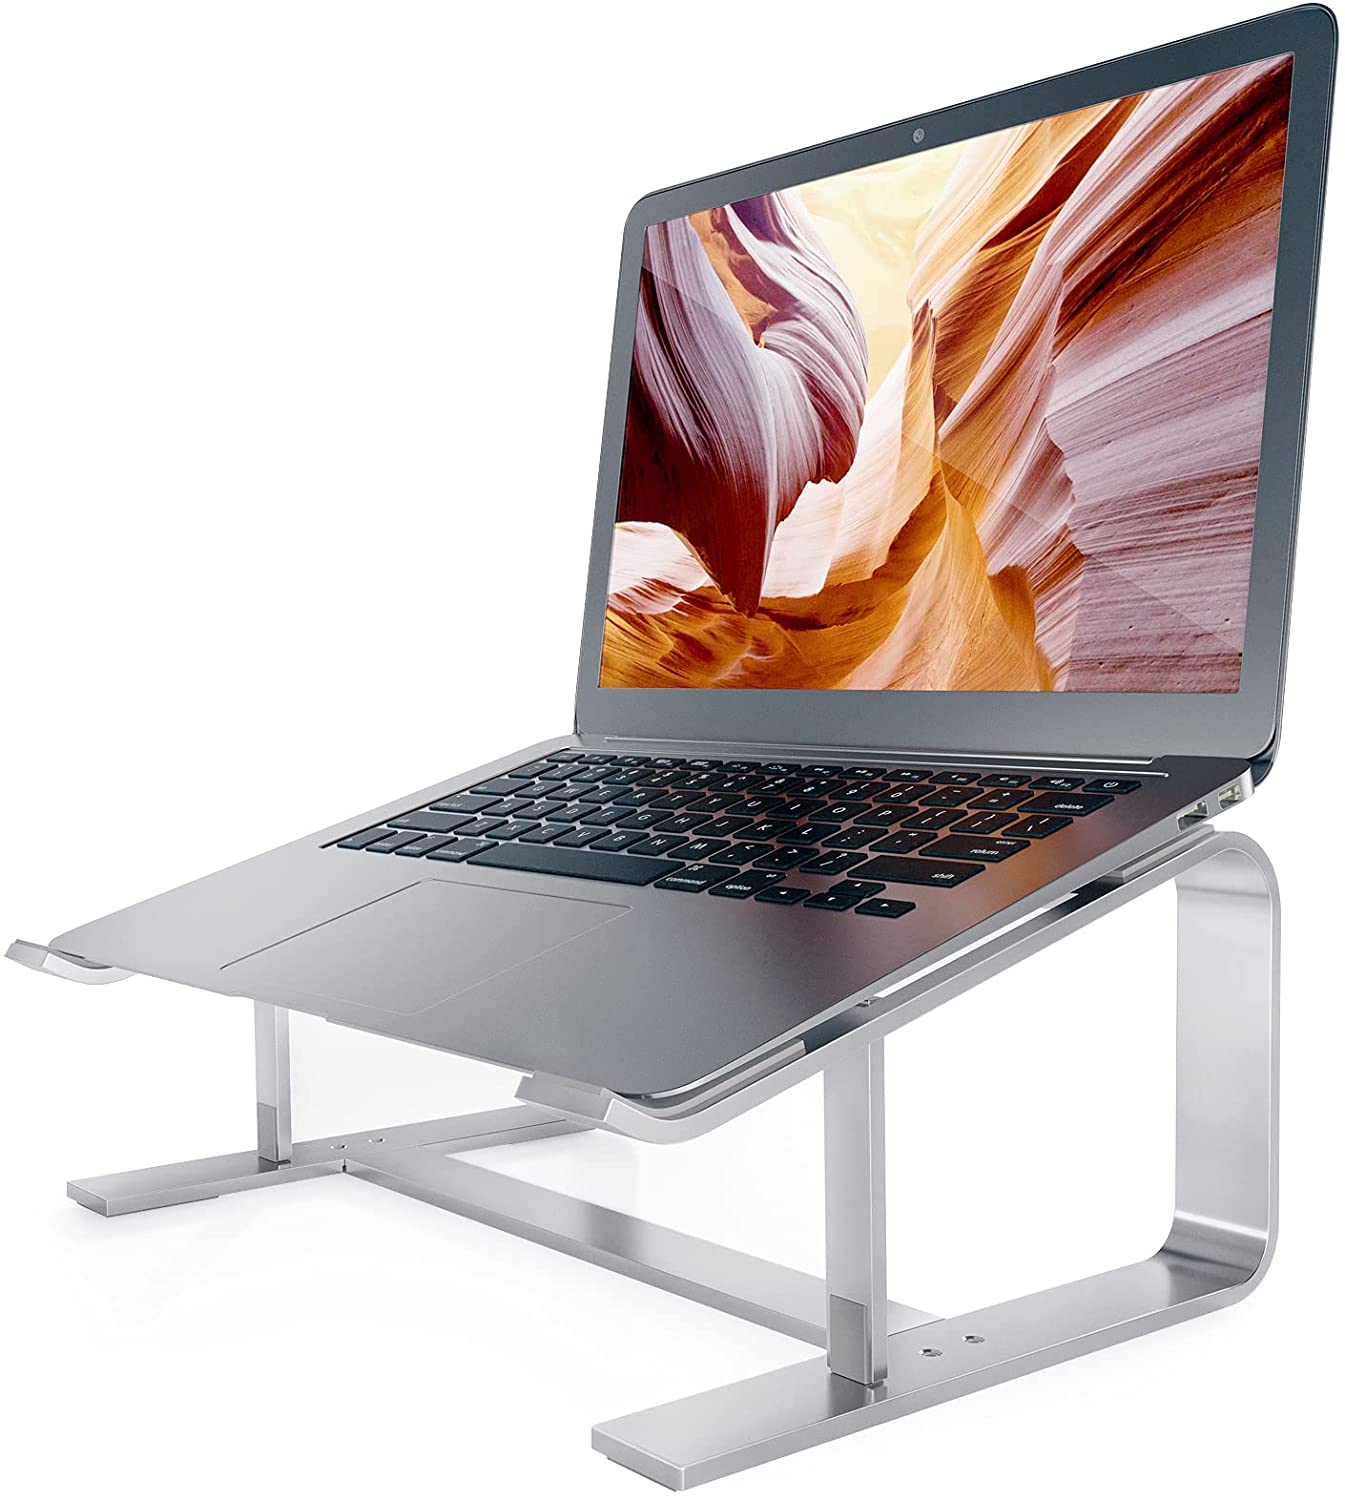 Laptop Stand, Computer Stand for Laptop, Aluminium Laptop Riser, Ergonomic Laptop Holder Compatible with MacBook Air Pro, Dell XPS, More 10-17 Inch Laptops Work from Home-Sliver Amazon Banned